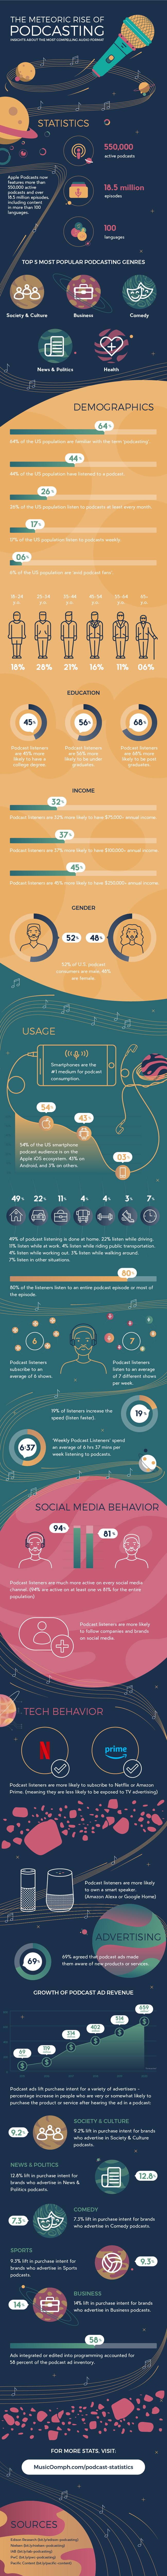 The Meteoric Rise of Podcasting